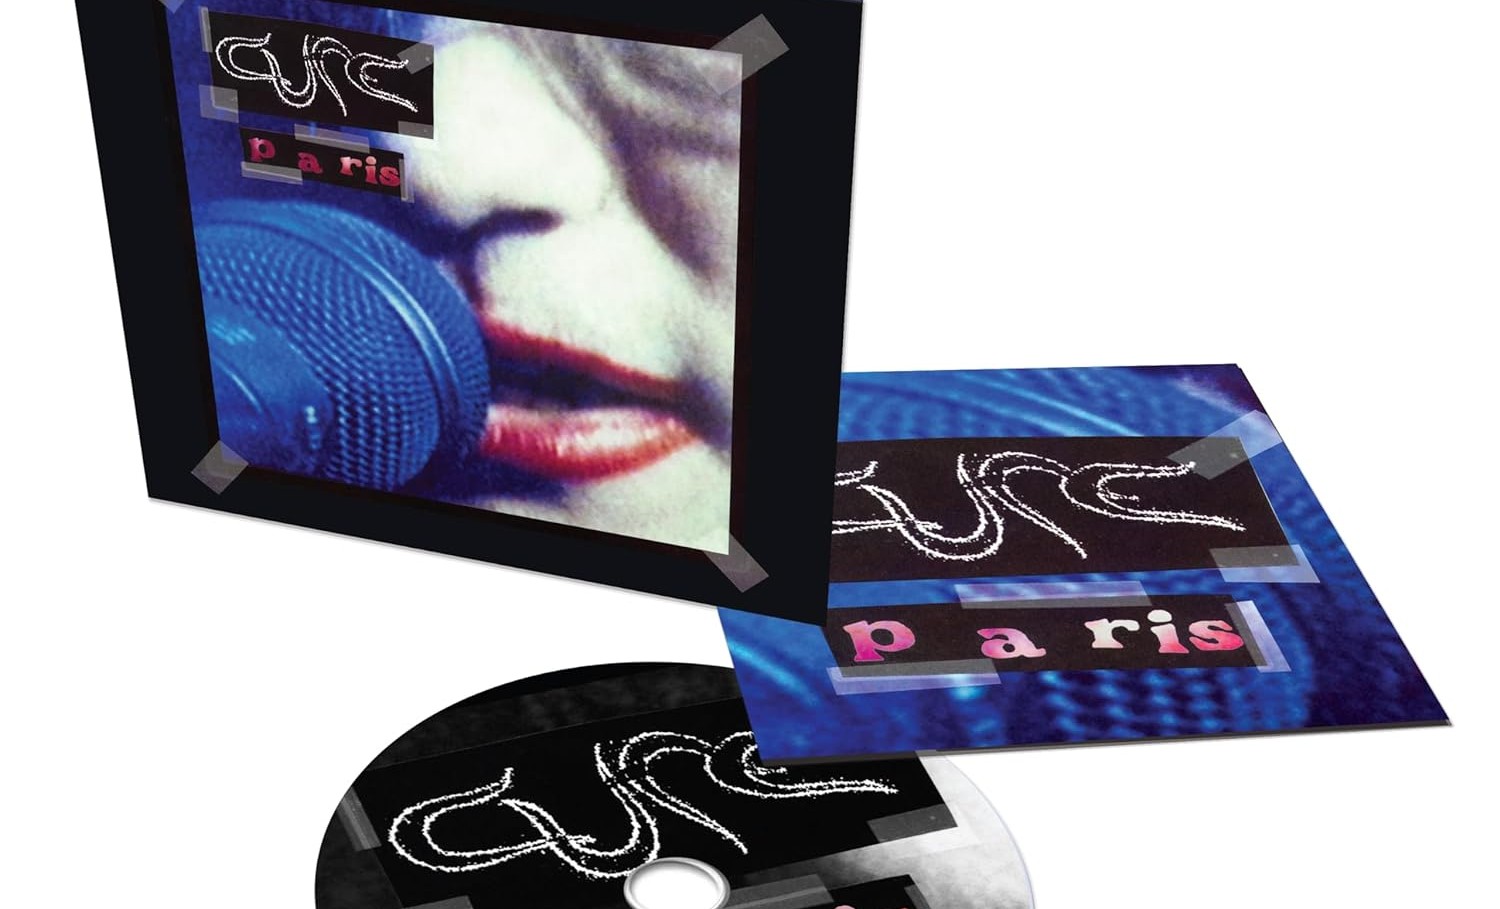 The Cure to Reissue Wish With 24 Unreleased Tracks for 30th Anniversary